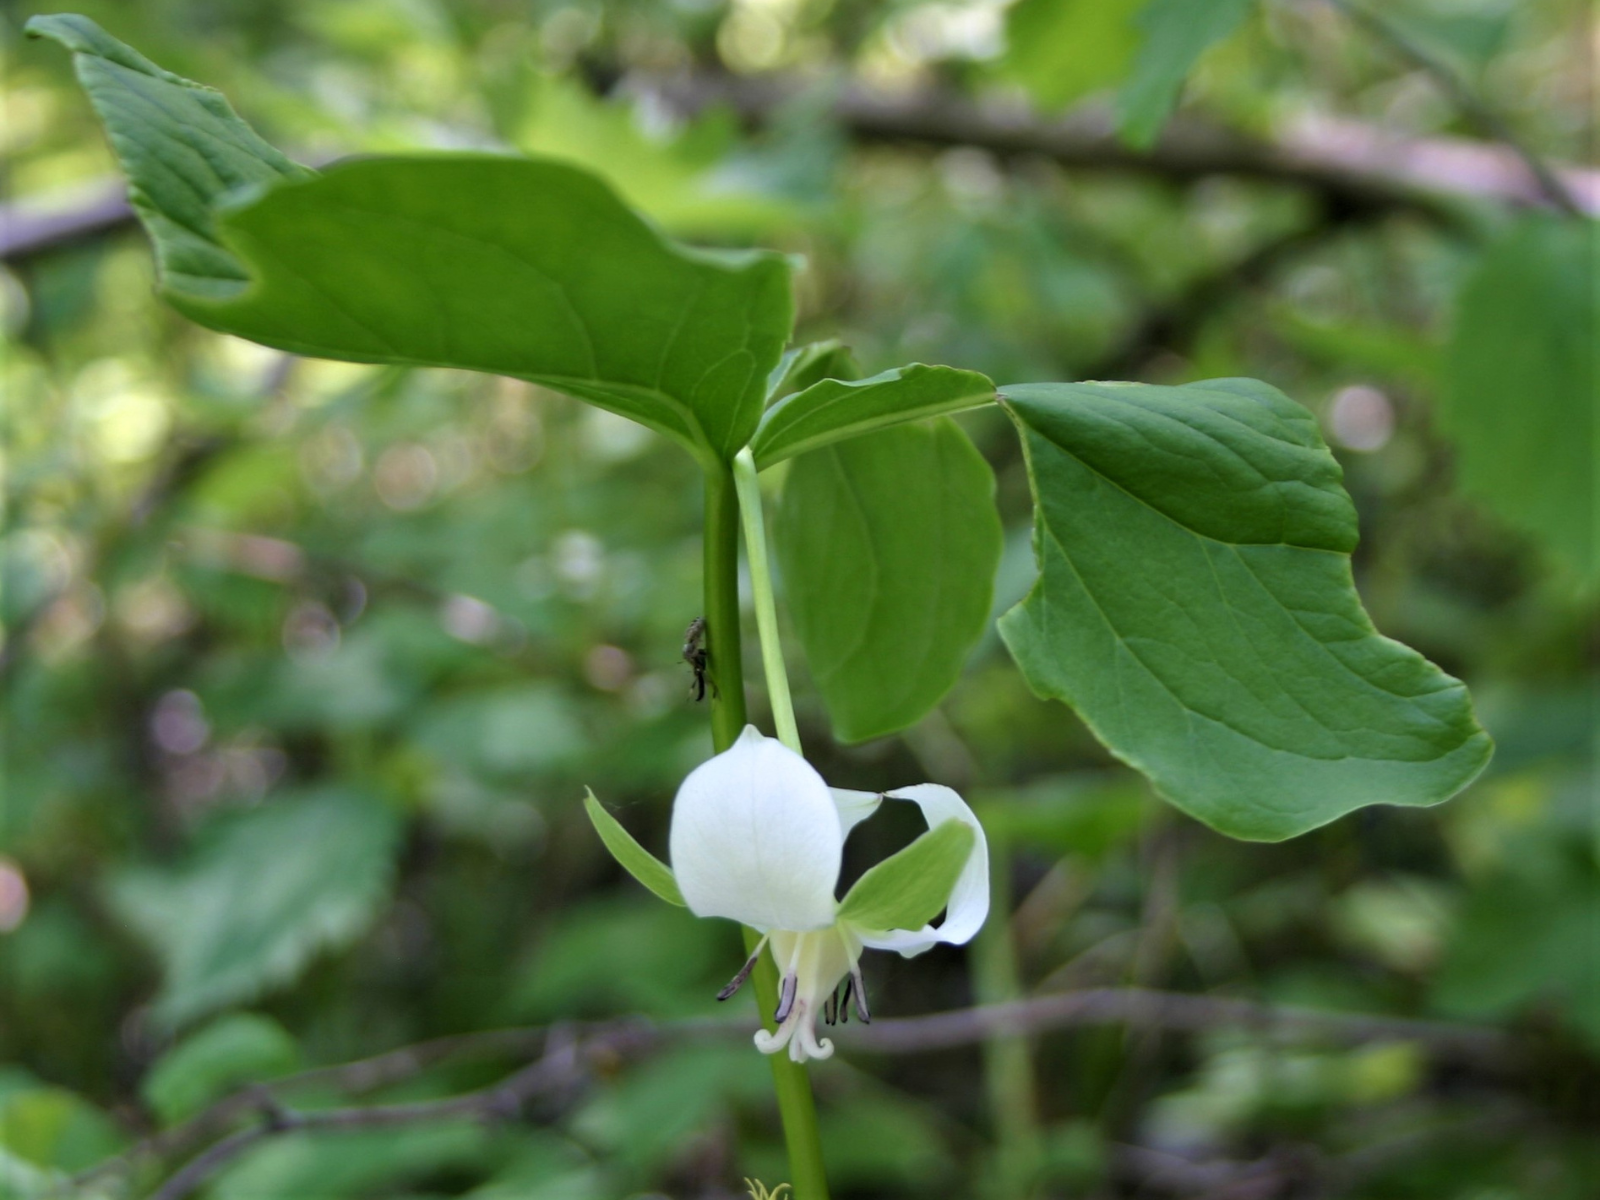 Close up on a white bell-shaped flower hanging from three-parted leaves.